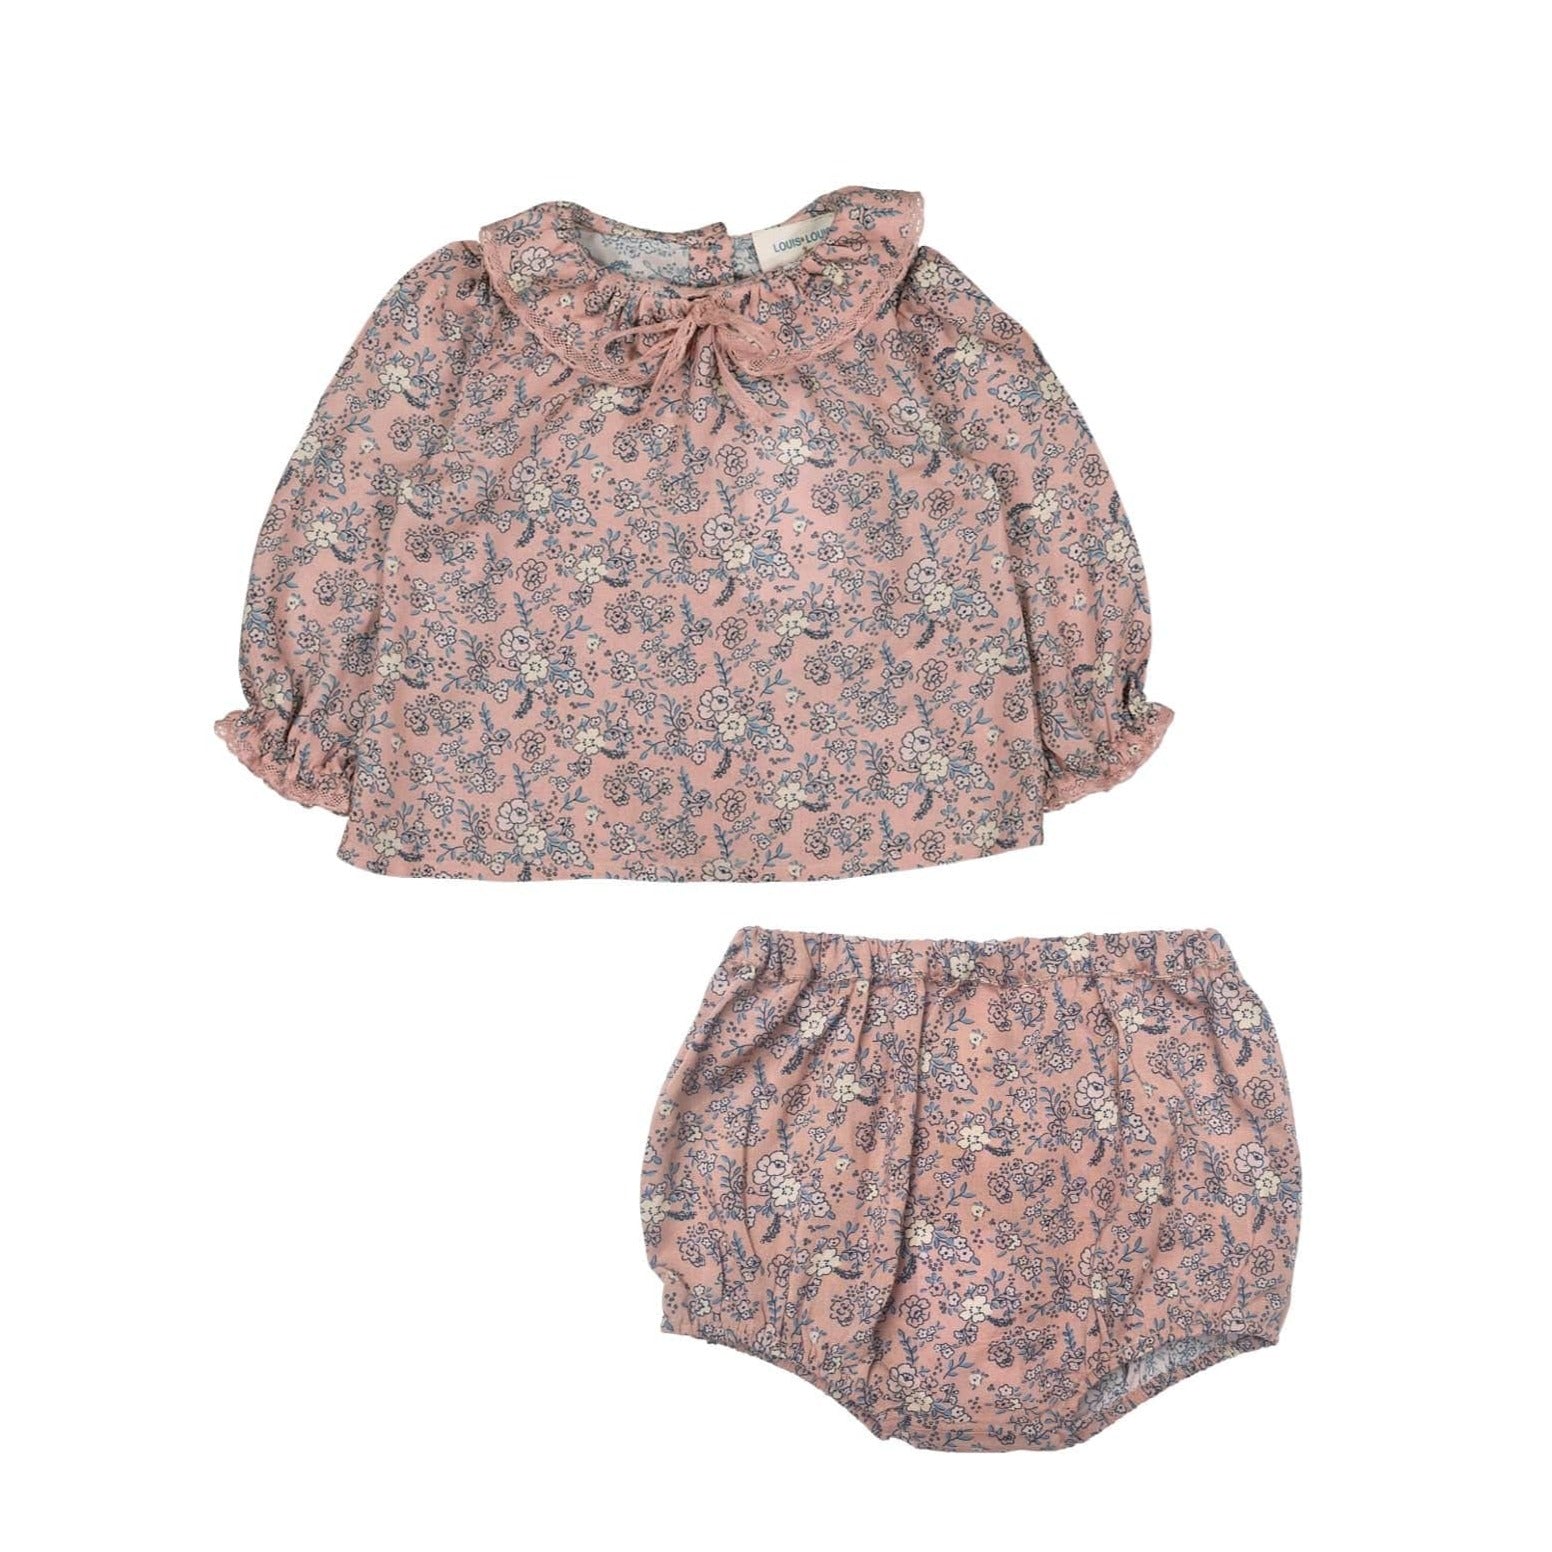 LOUIS LOUISE - Clothes for babies, kids and womens birth gift - Louis Louise